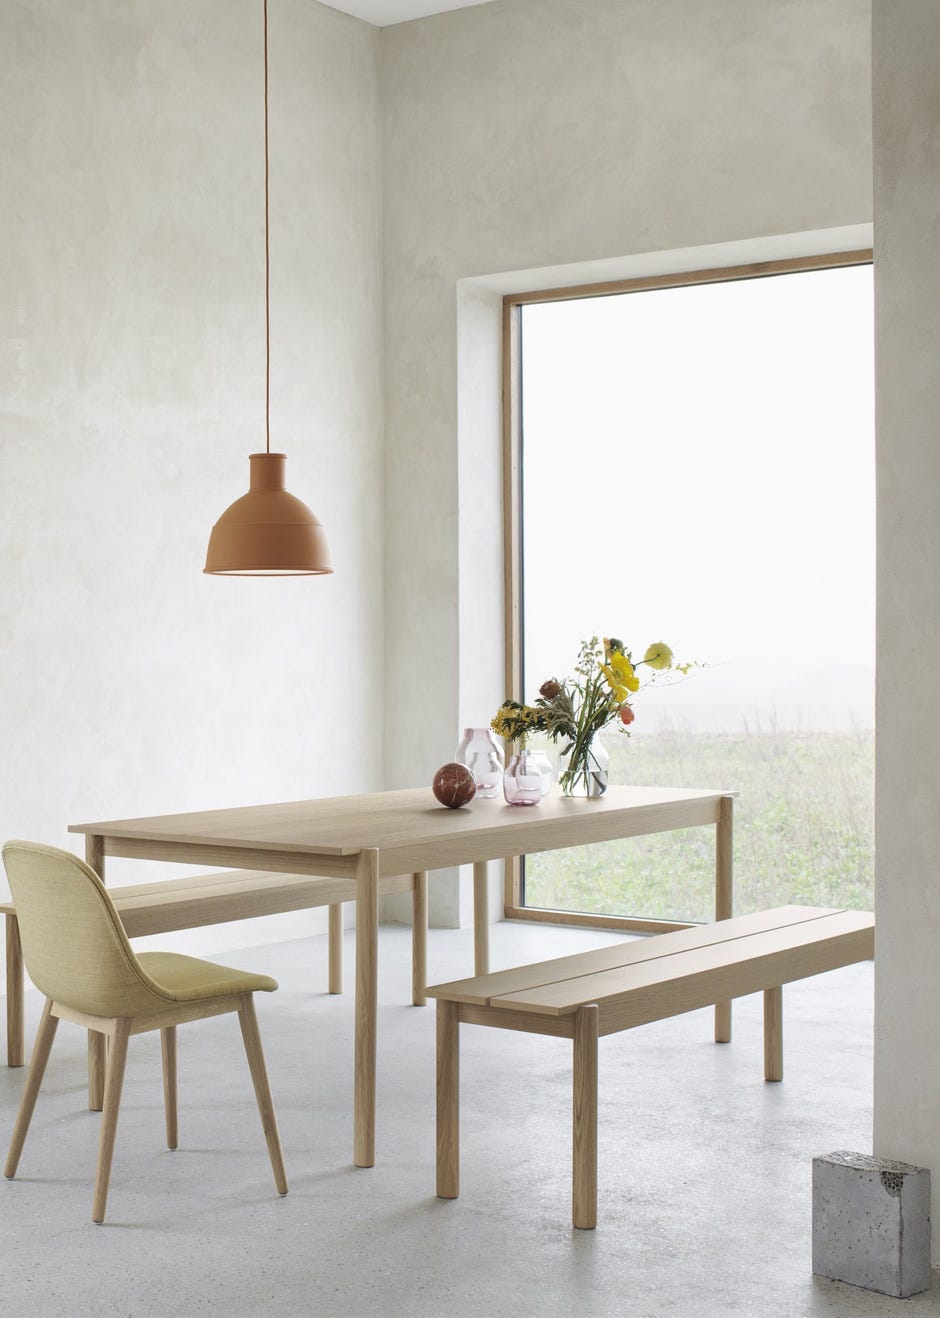 Unfold Form Us With Love – Muuto